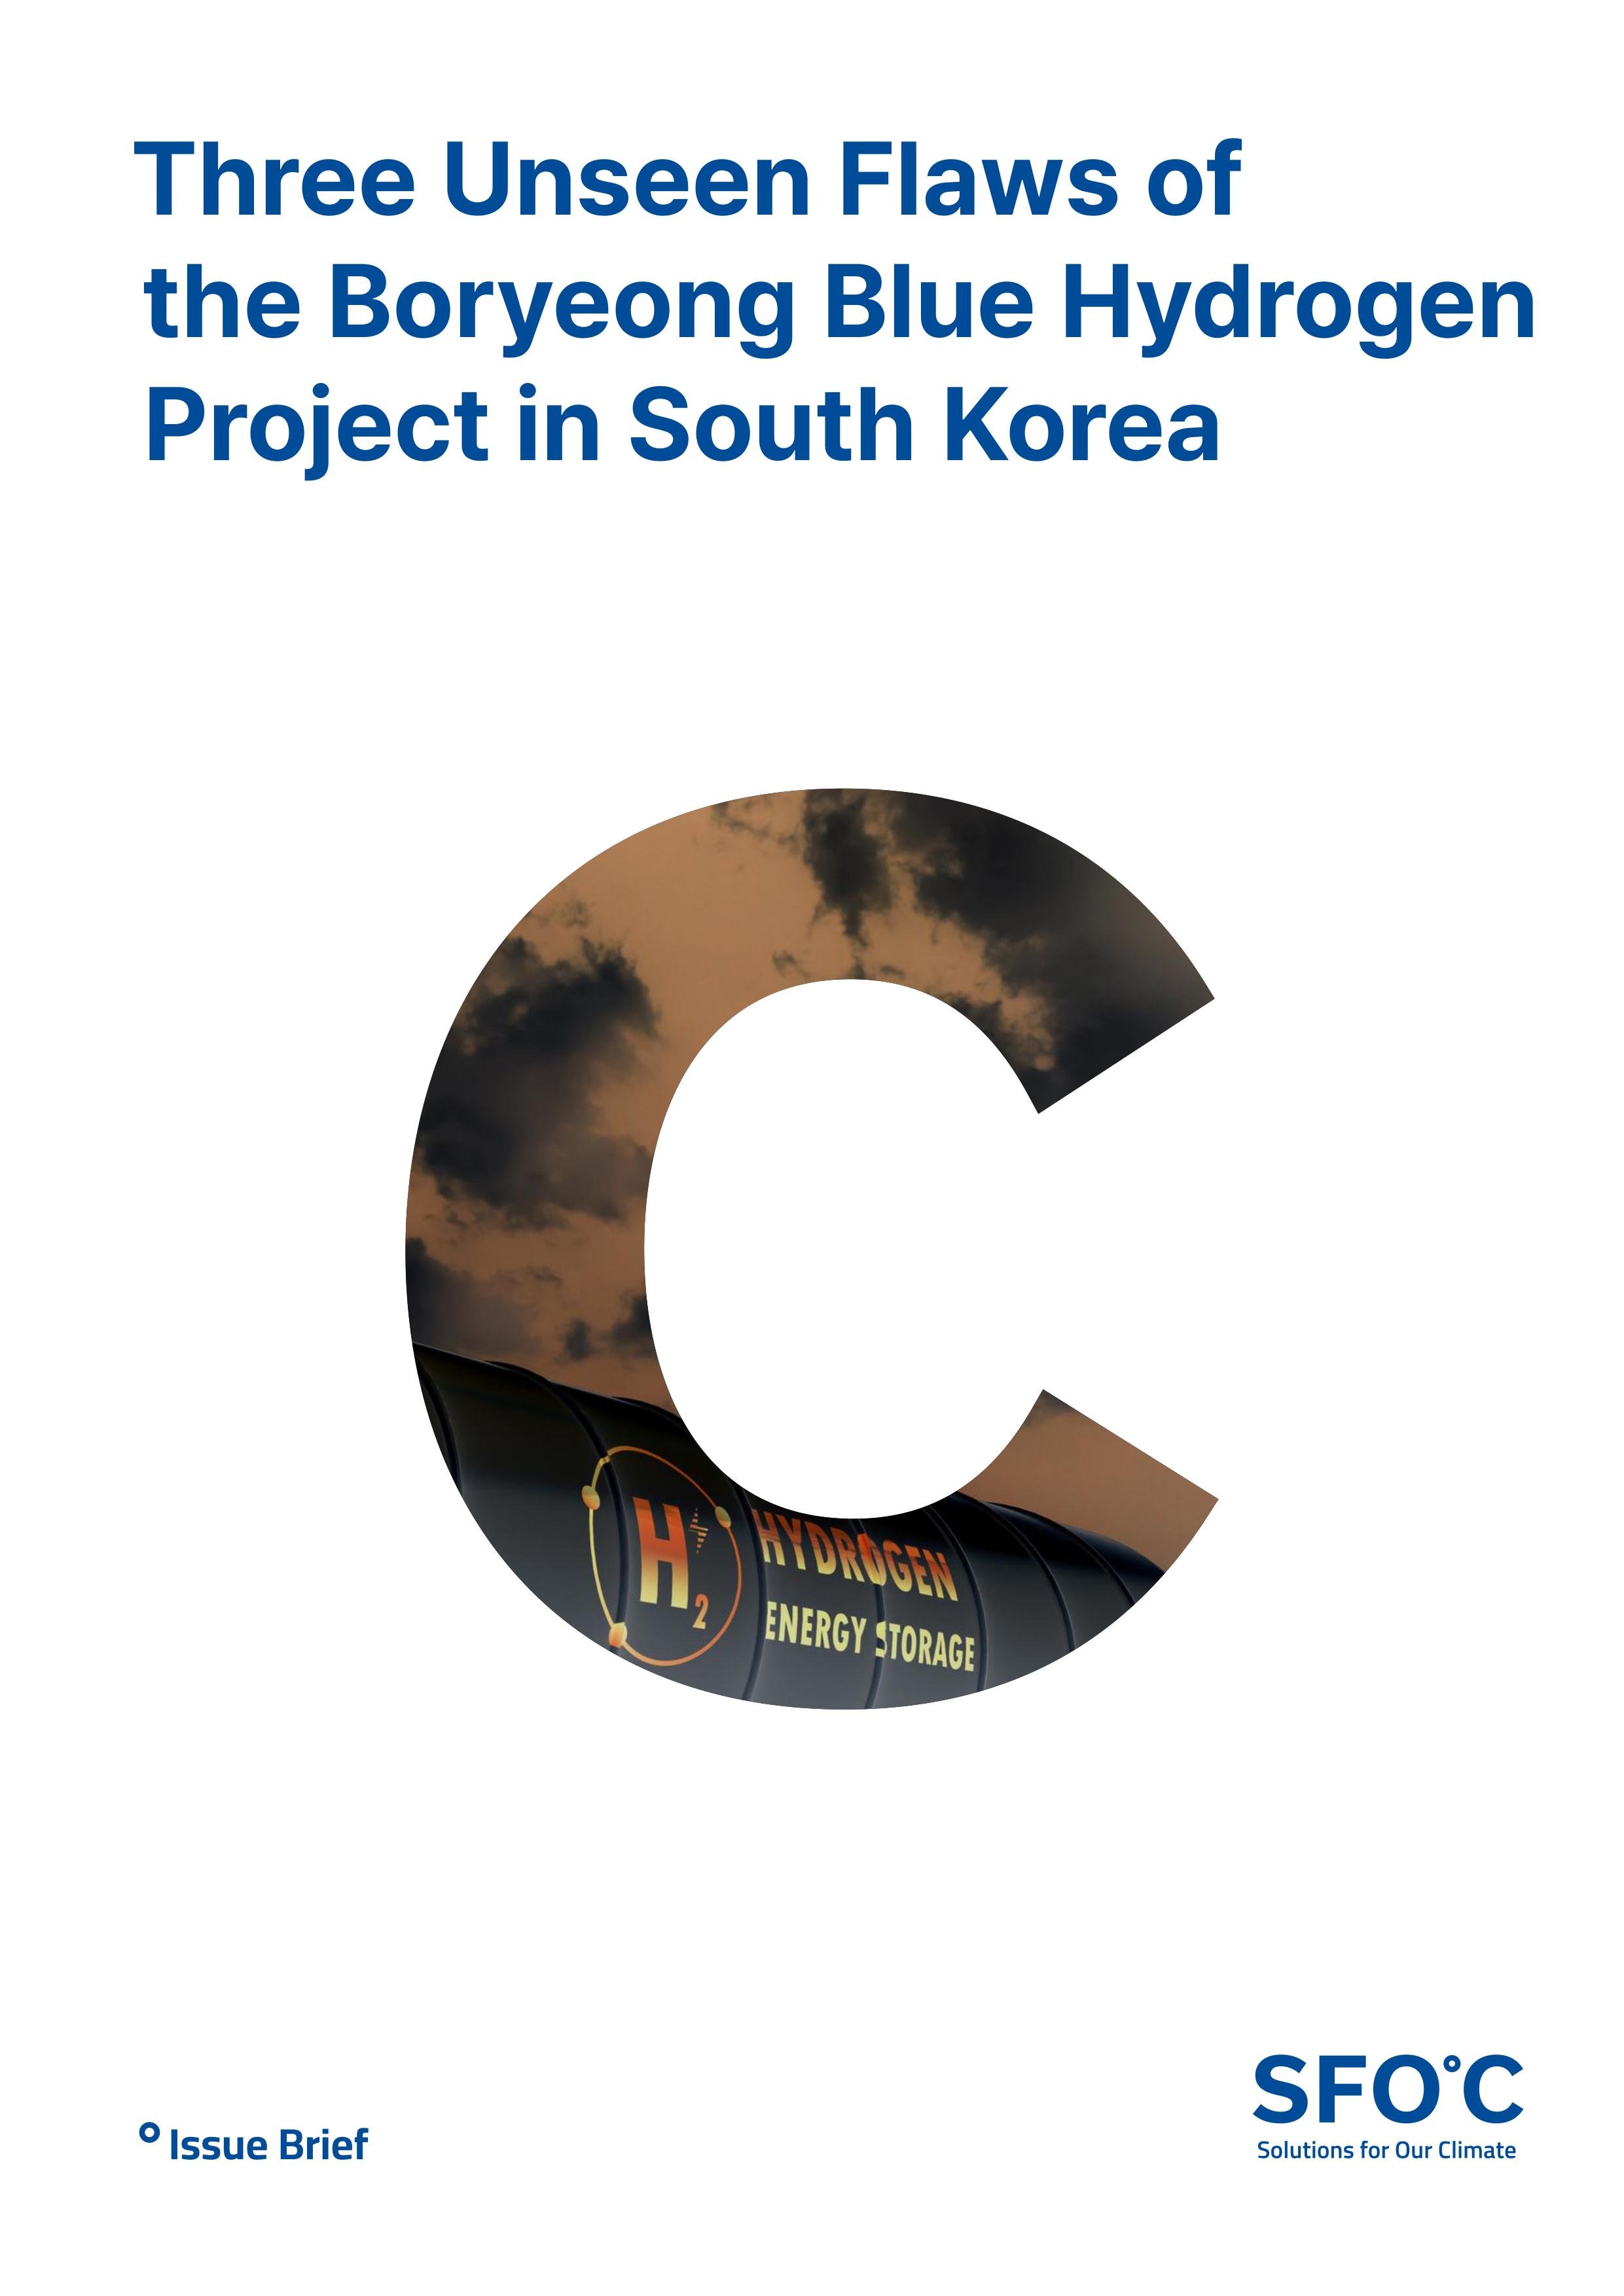 Three Unseen Flaws of the Boryeong Blue Hydrogen Project in South Korea